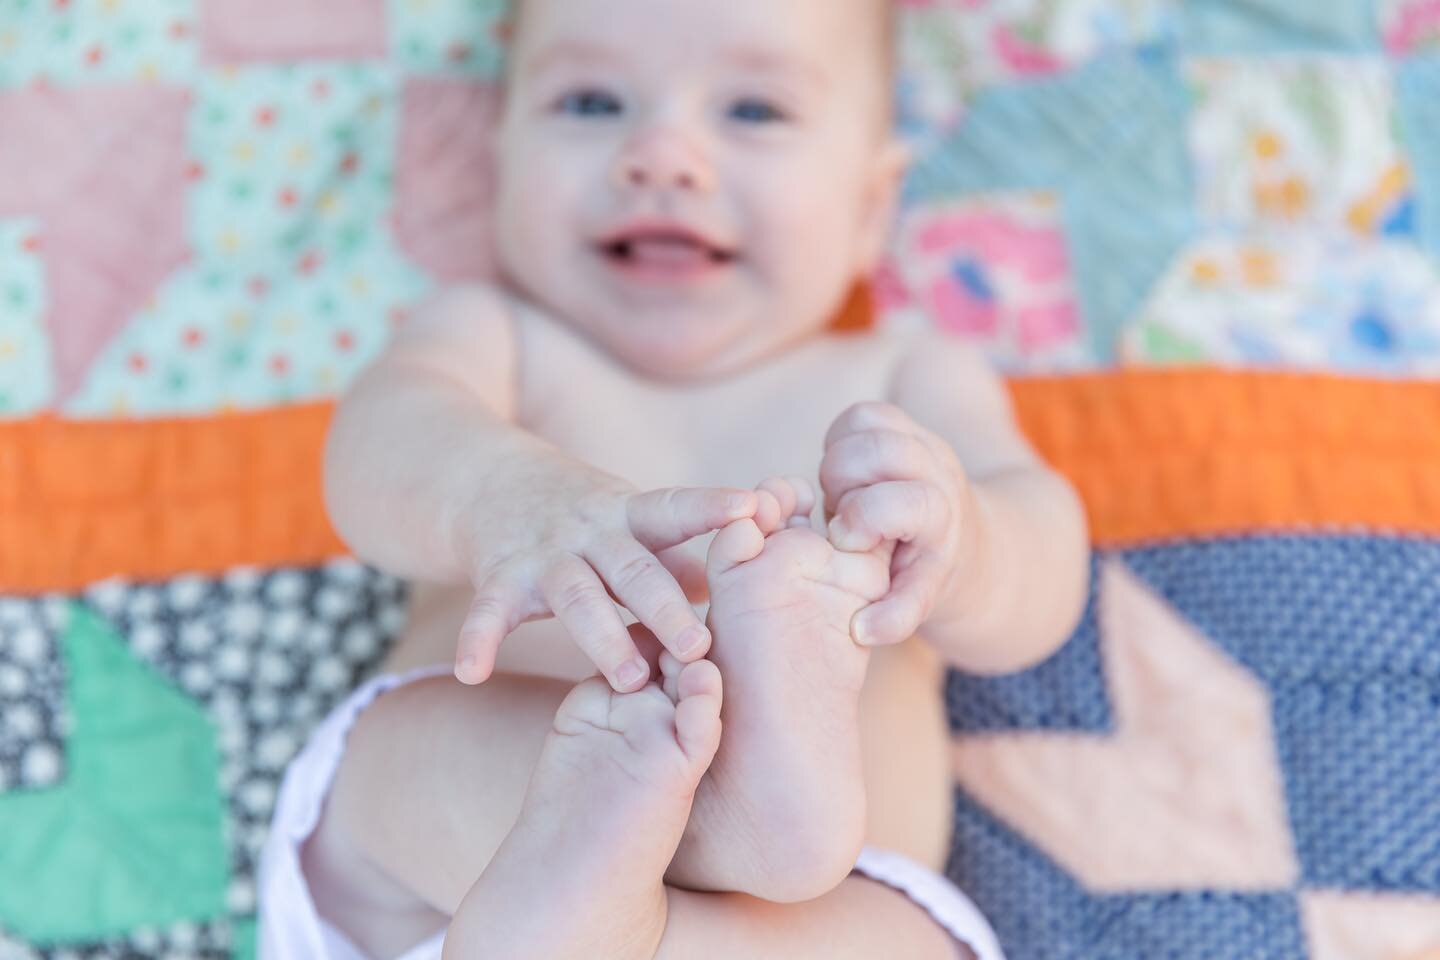 Isn&rsquo;t it the best when babies find their feet and all they want to do is play with them? I can&rsquo;t! 🥰